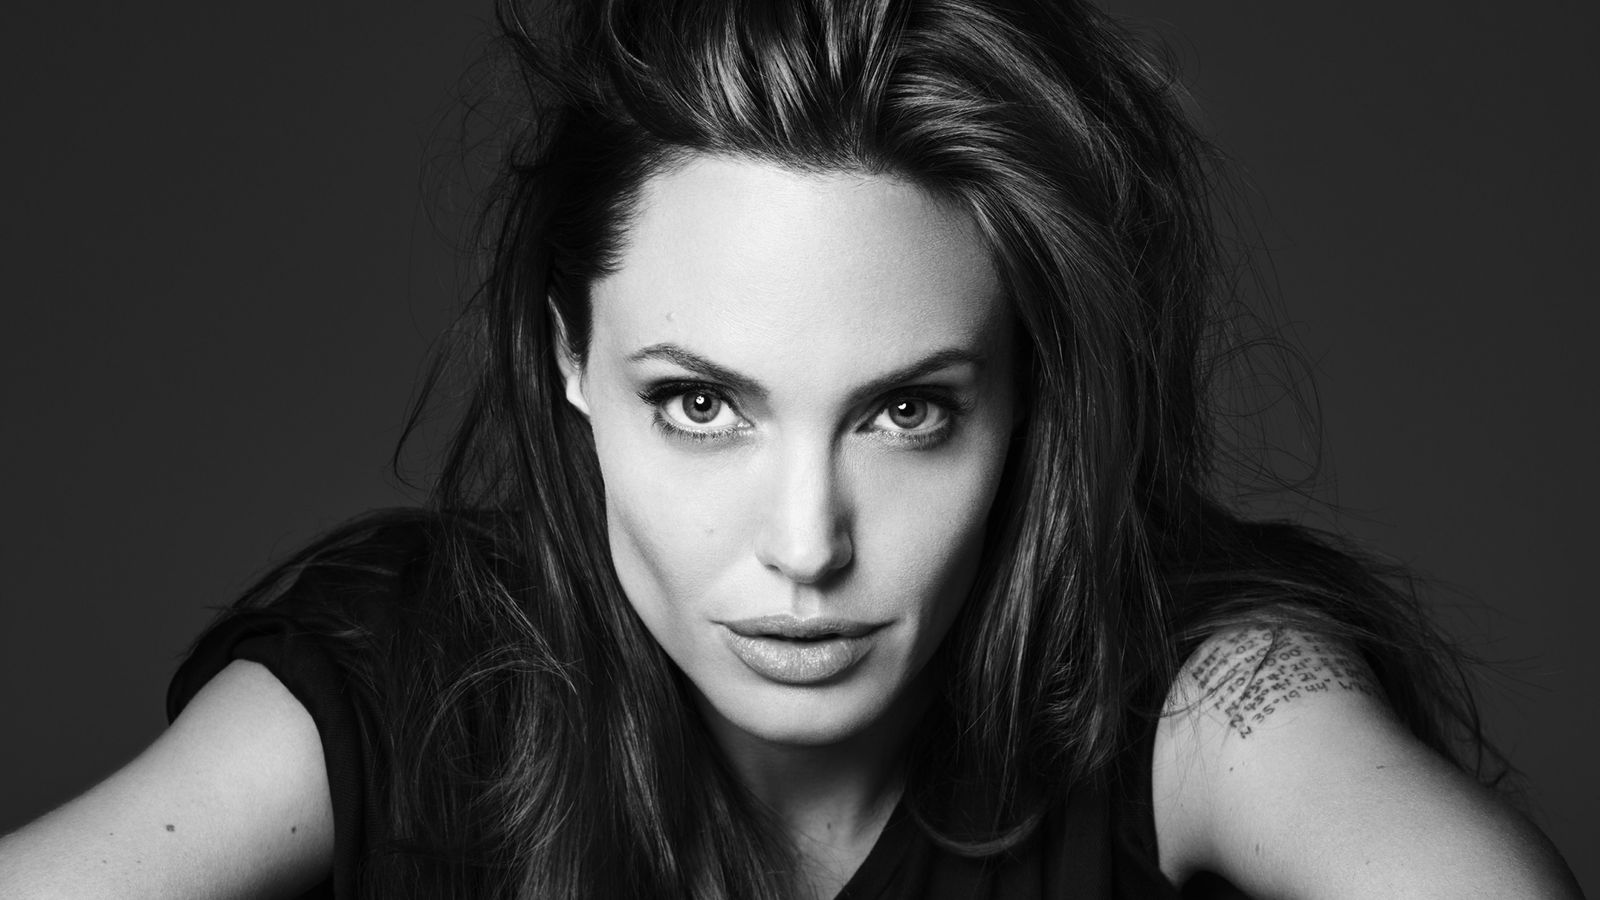 Fans Enraged By The Casting Process In Angelina Jolie's Upcoming Movie!